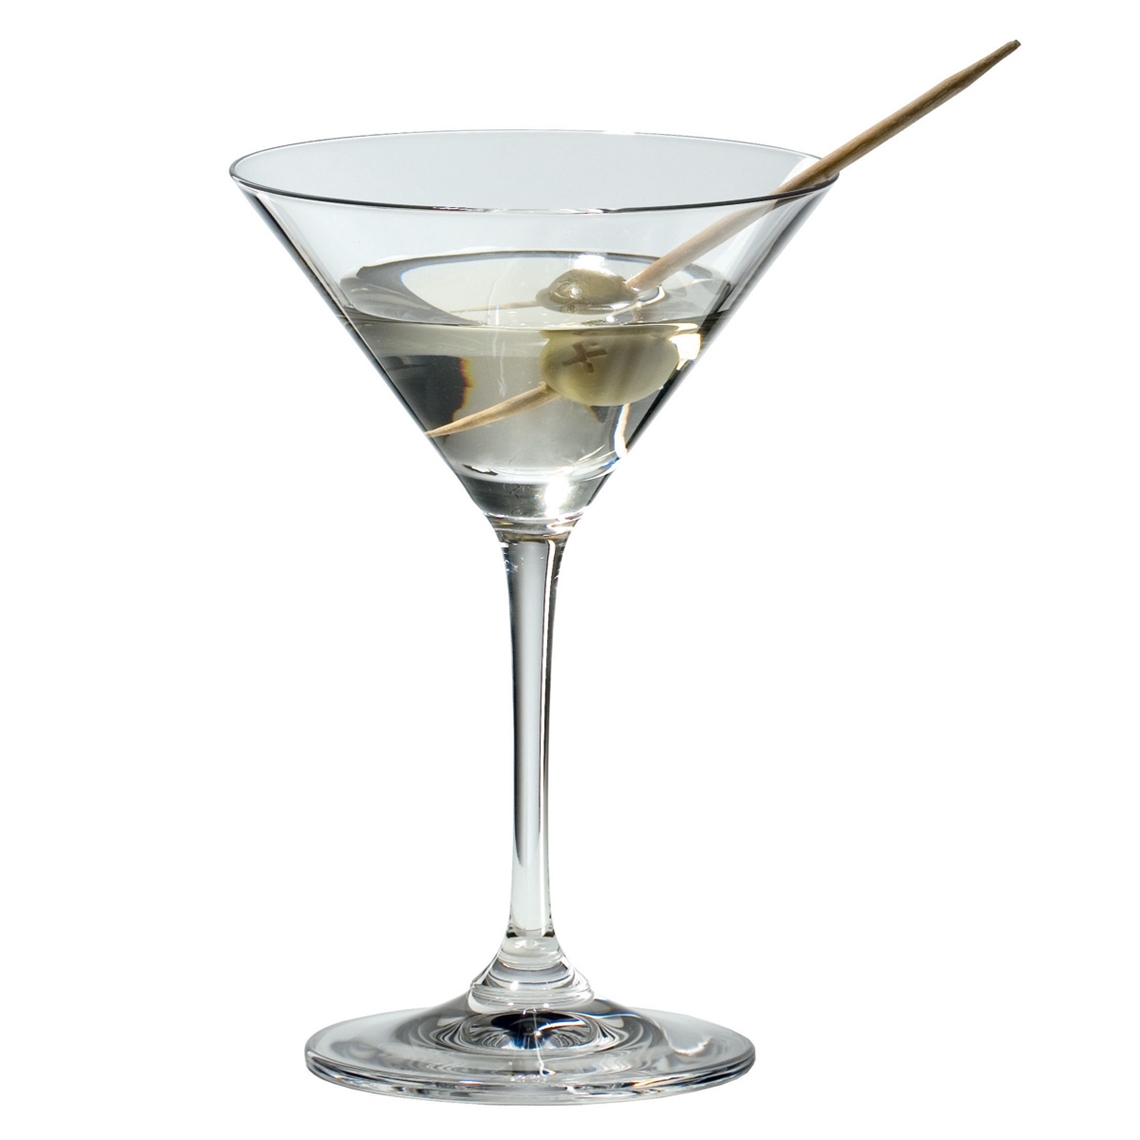 View more riedel vinum from our Martini Glasses range